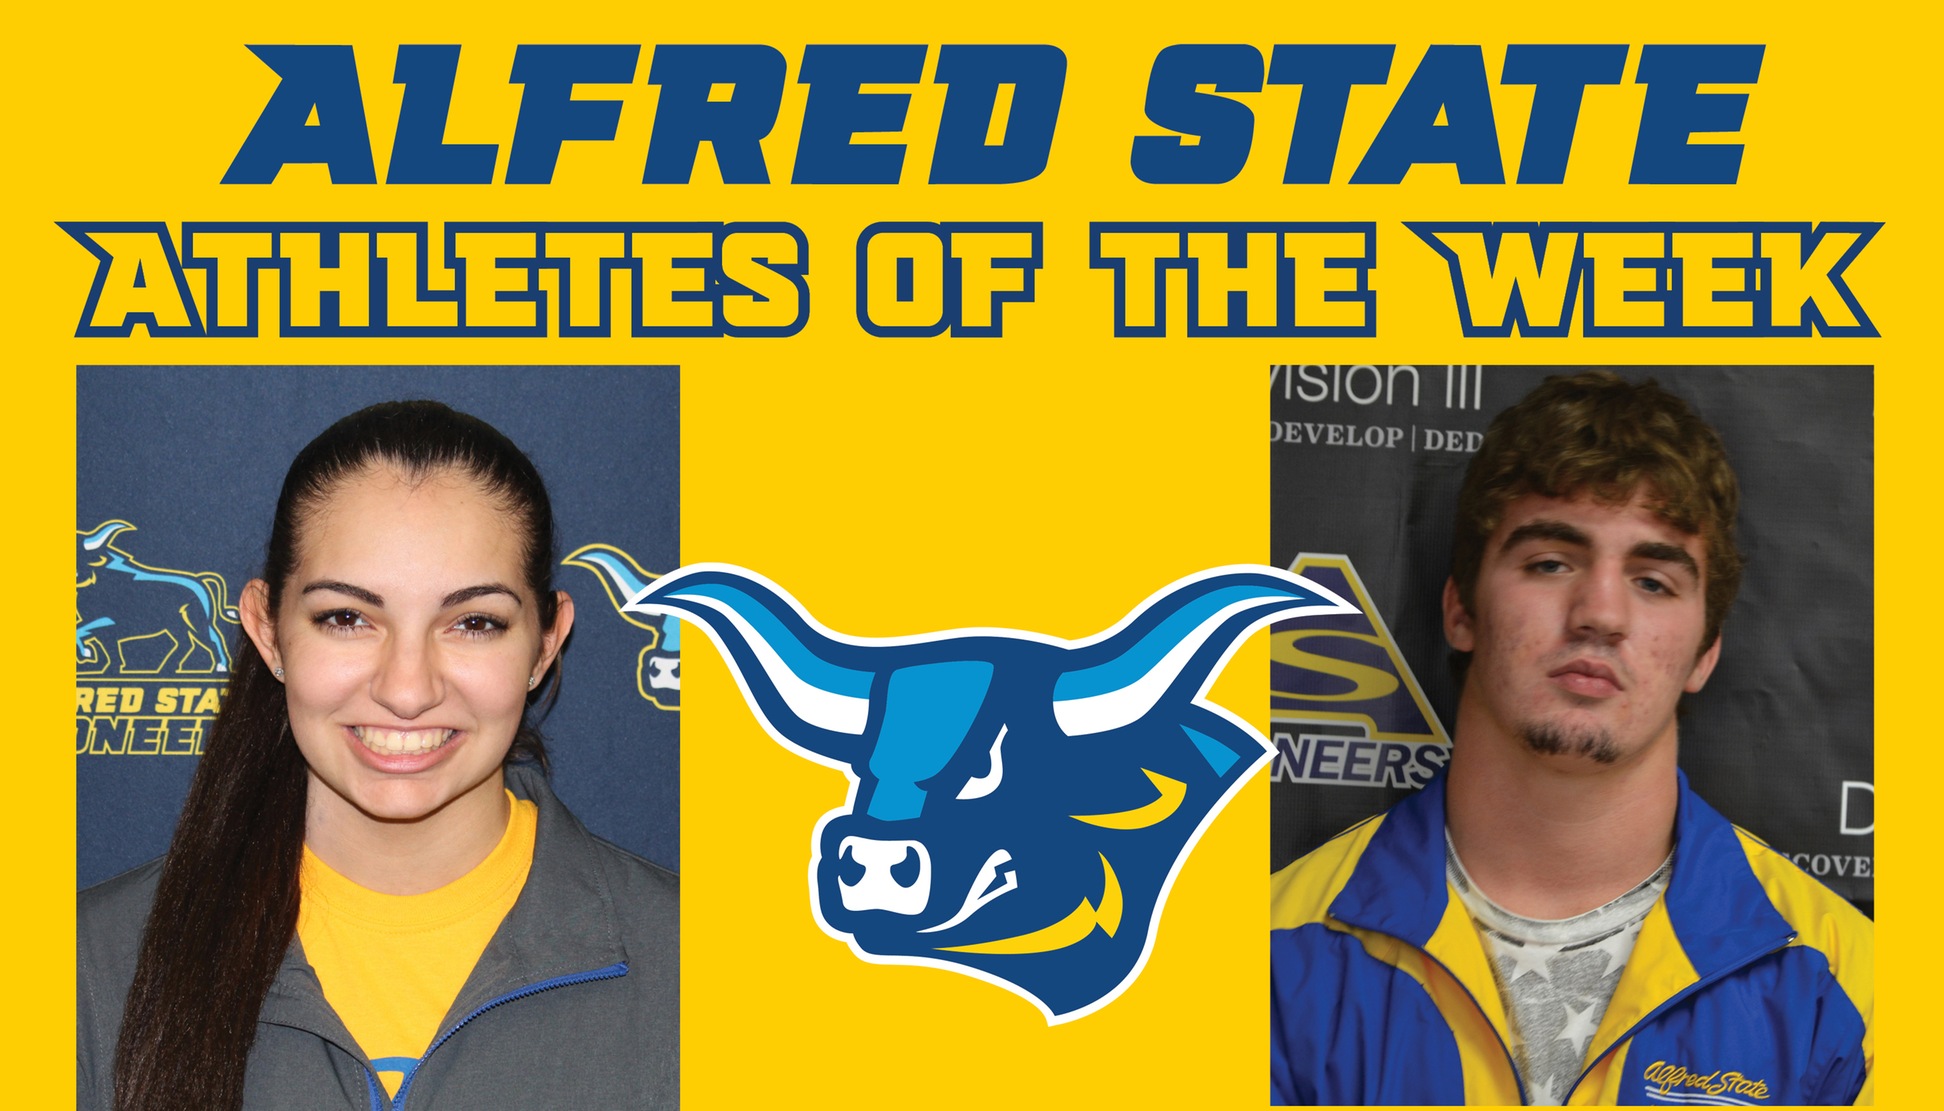 Jessie LaRue and Tristan Almeter named Athletes of the Week